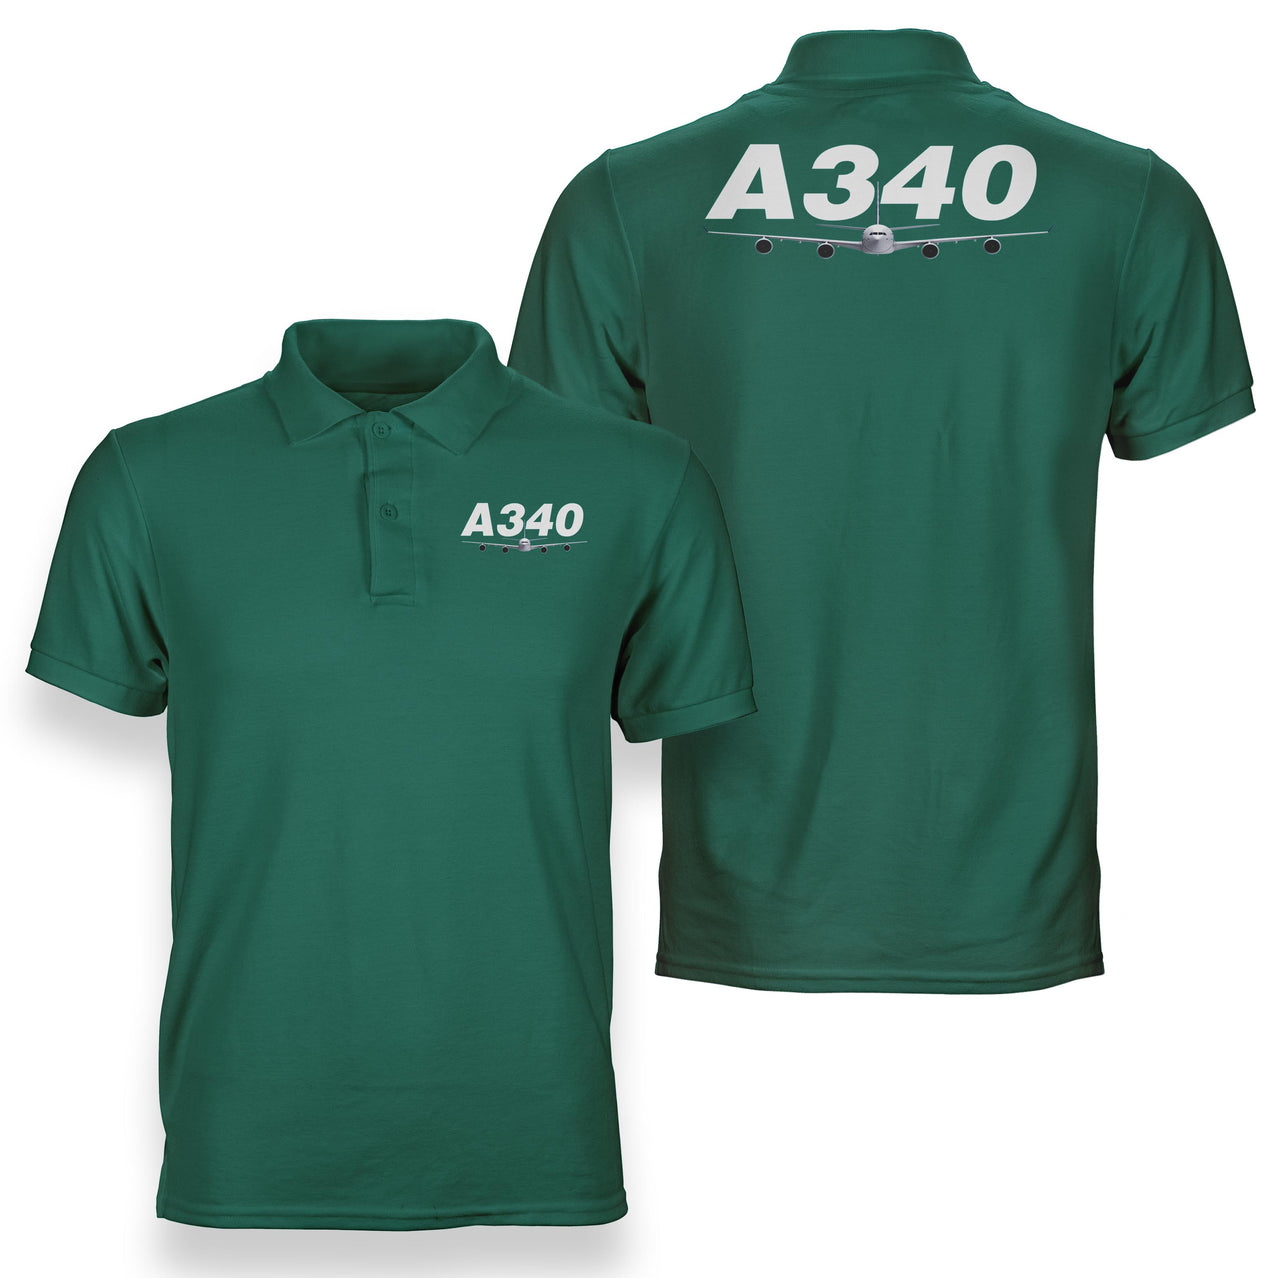 Super Airbus A340 Designed Double Side Polo T-Shirts